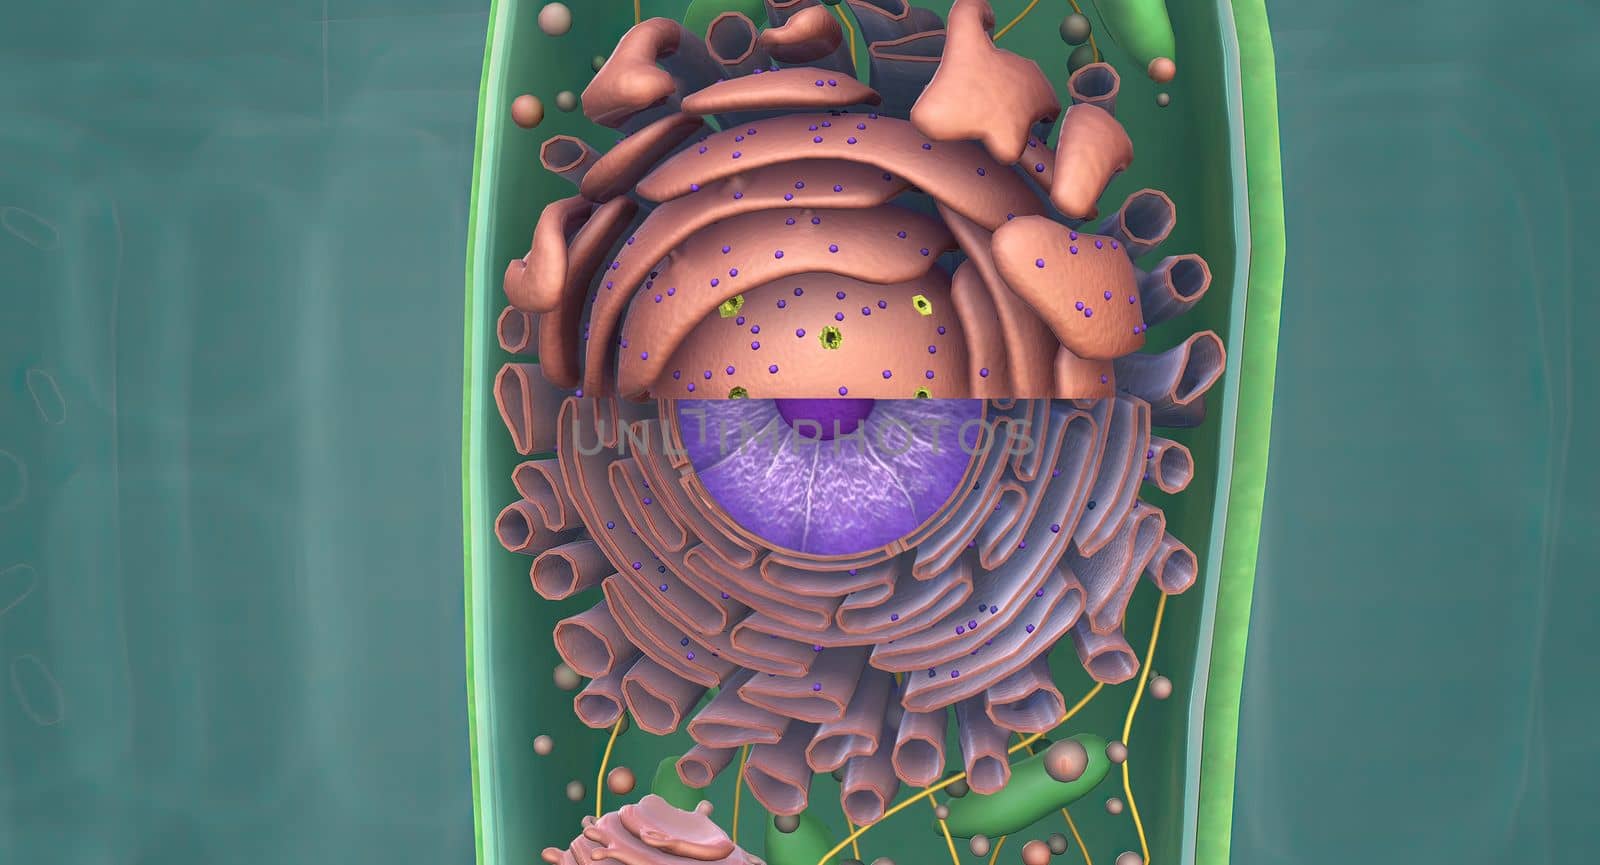 The Golgi complex is an organelle found in most eukaryotic cells.